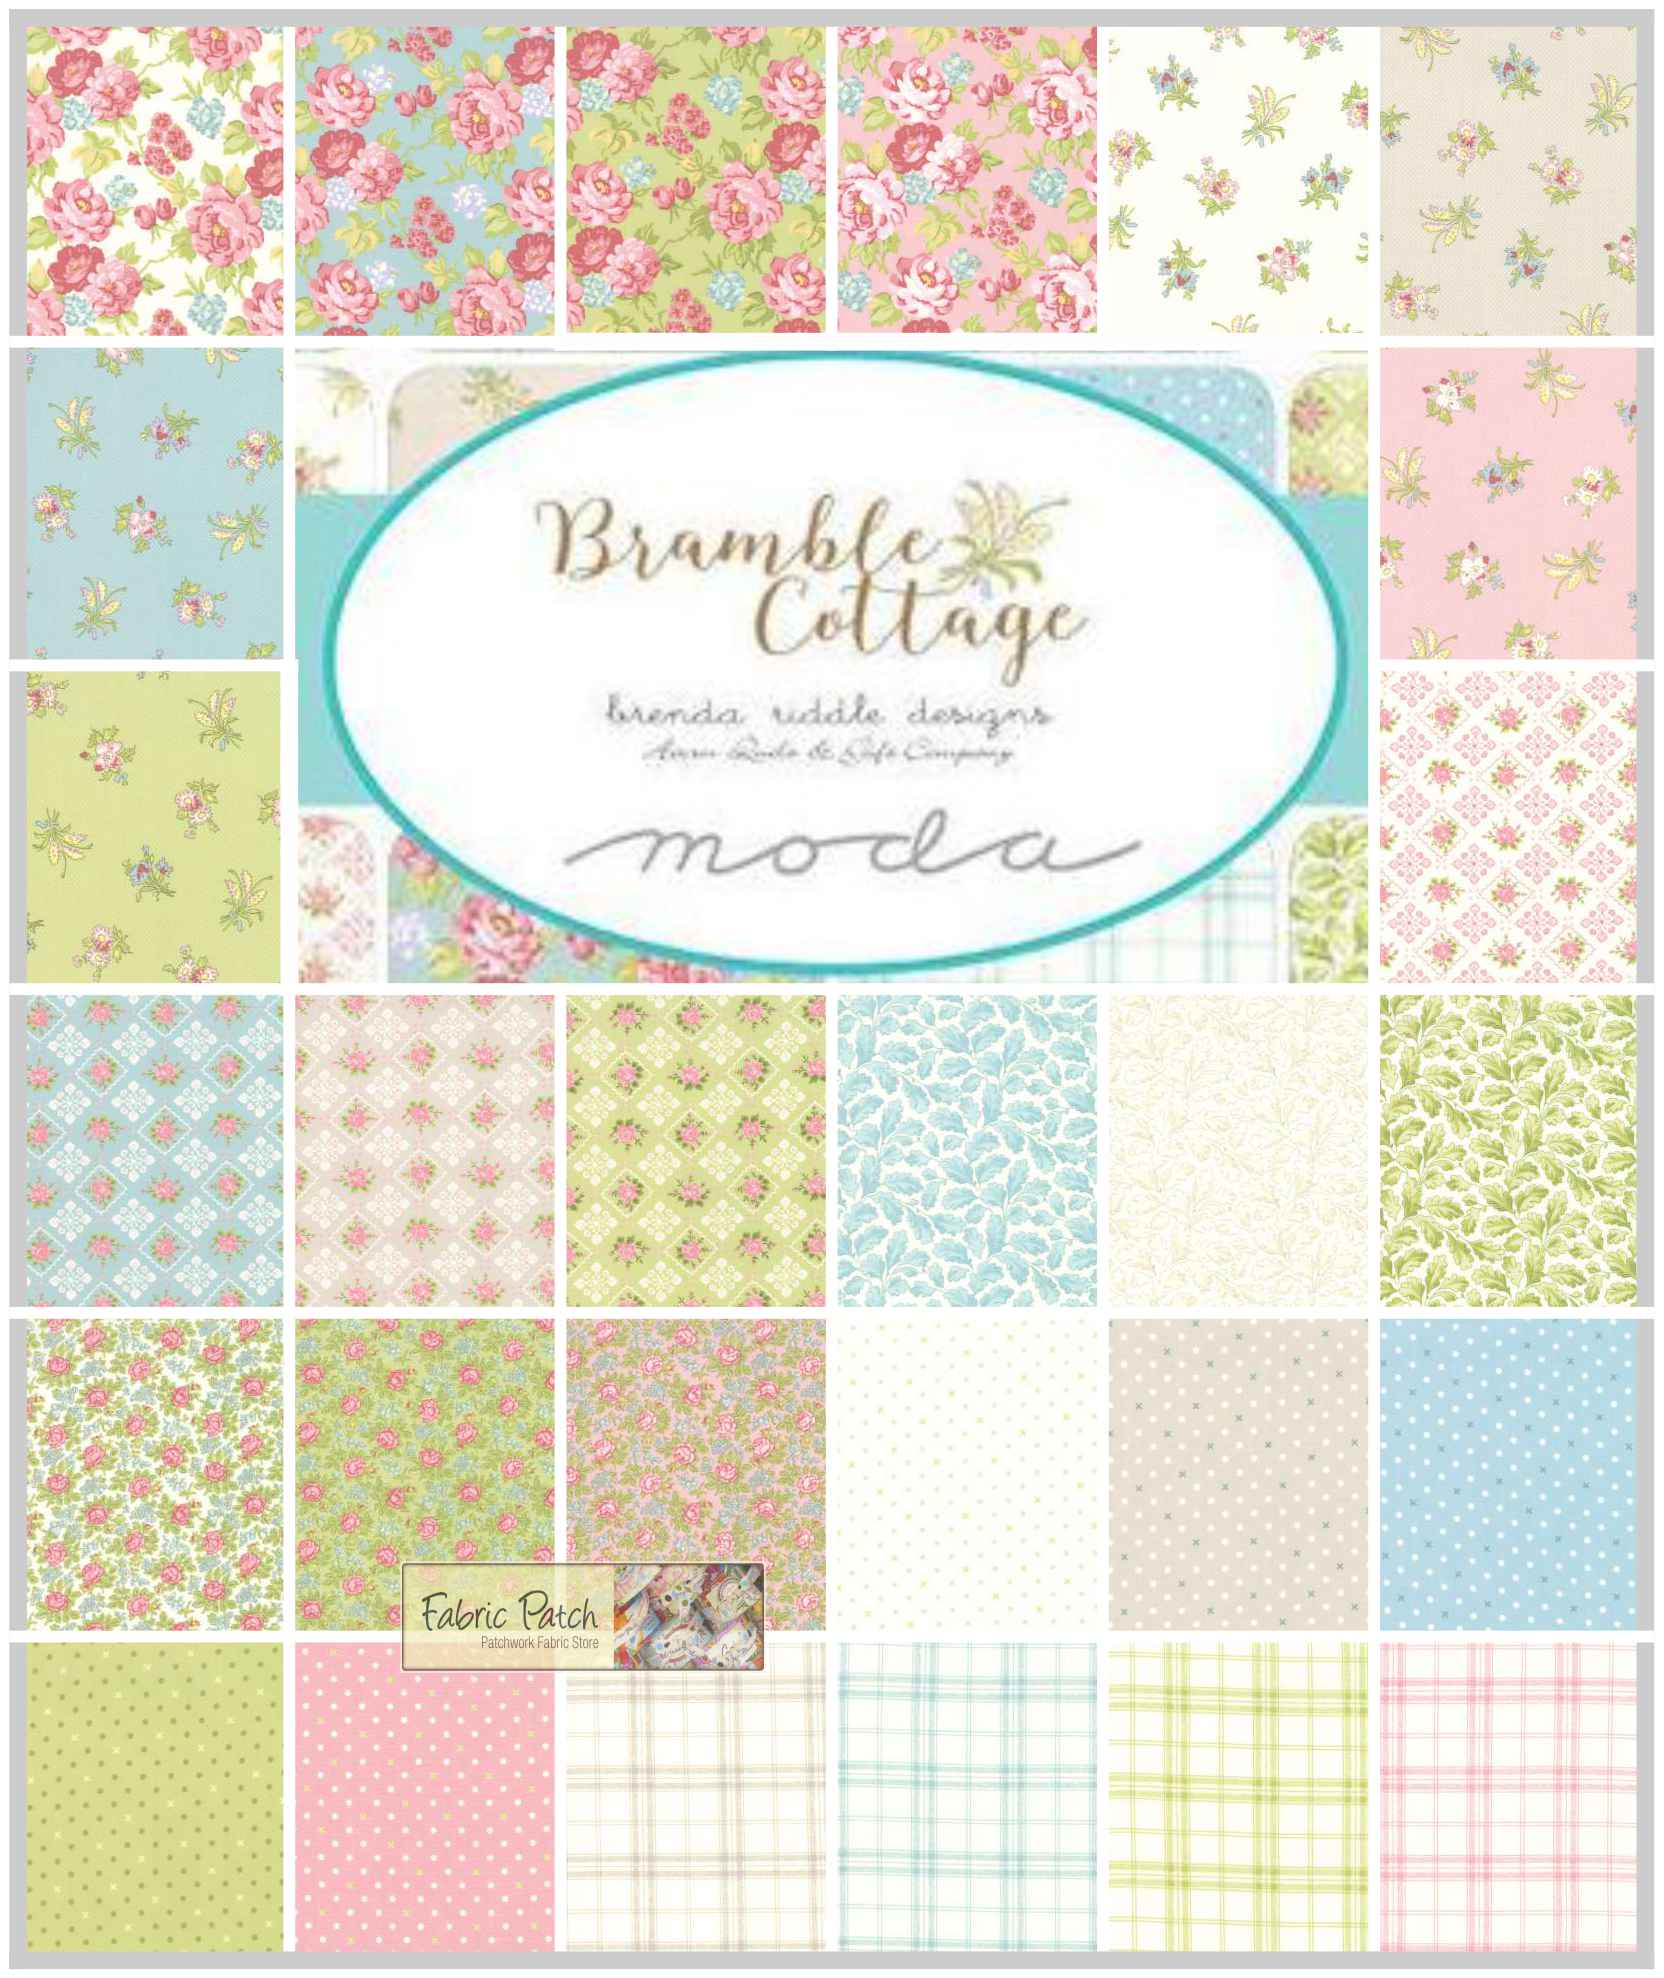 Bramble Cottage Mini Charm Square by Brenda Riddle Designs for Moda Fabrics.   Applique, patchwork and quilting fabrics. 